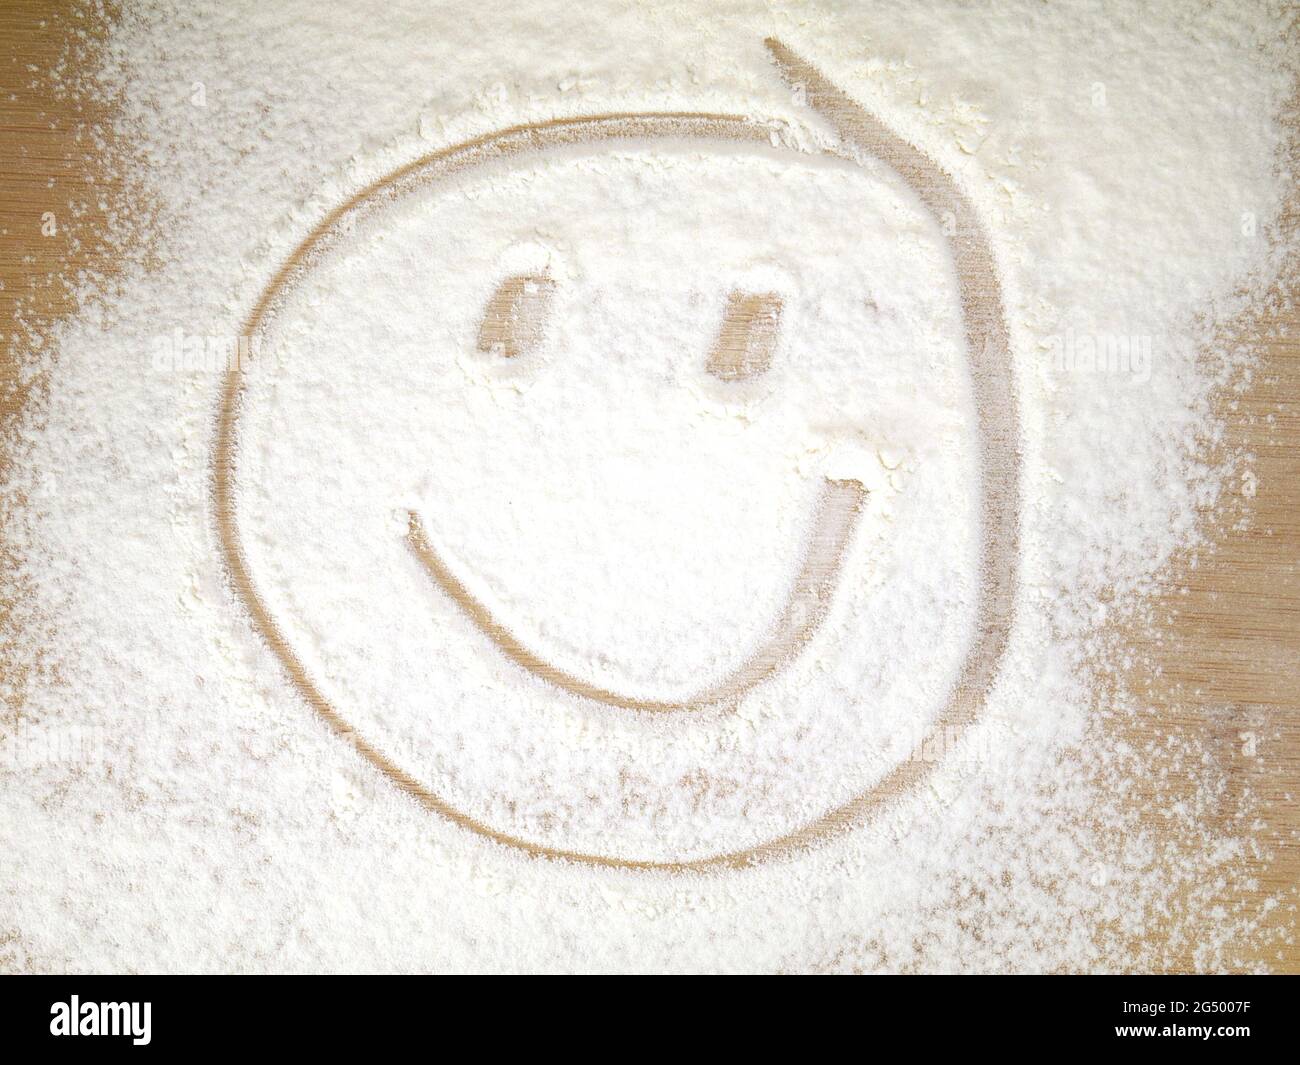 Smiling face on sprinkled flour Stock Photo